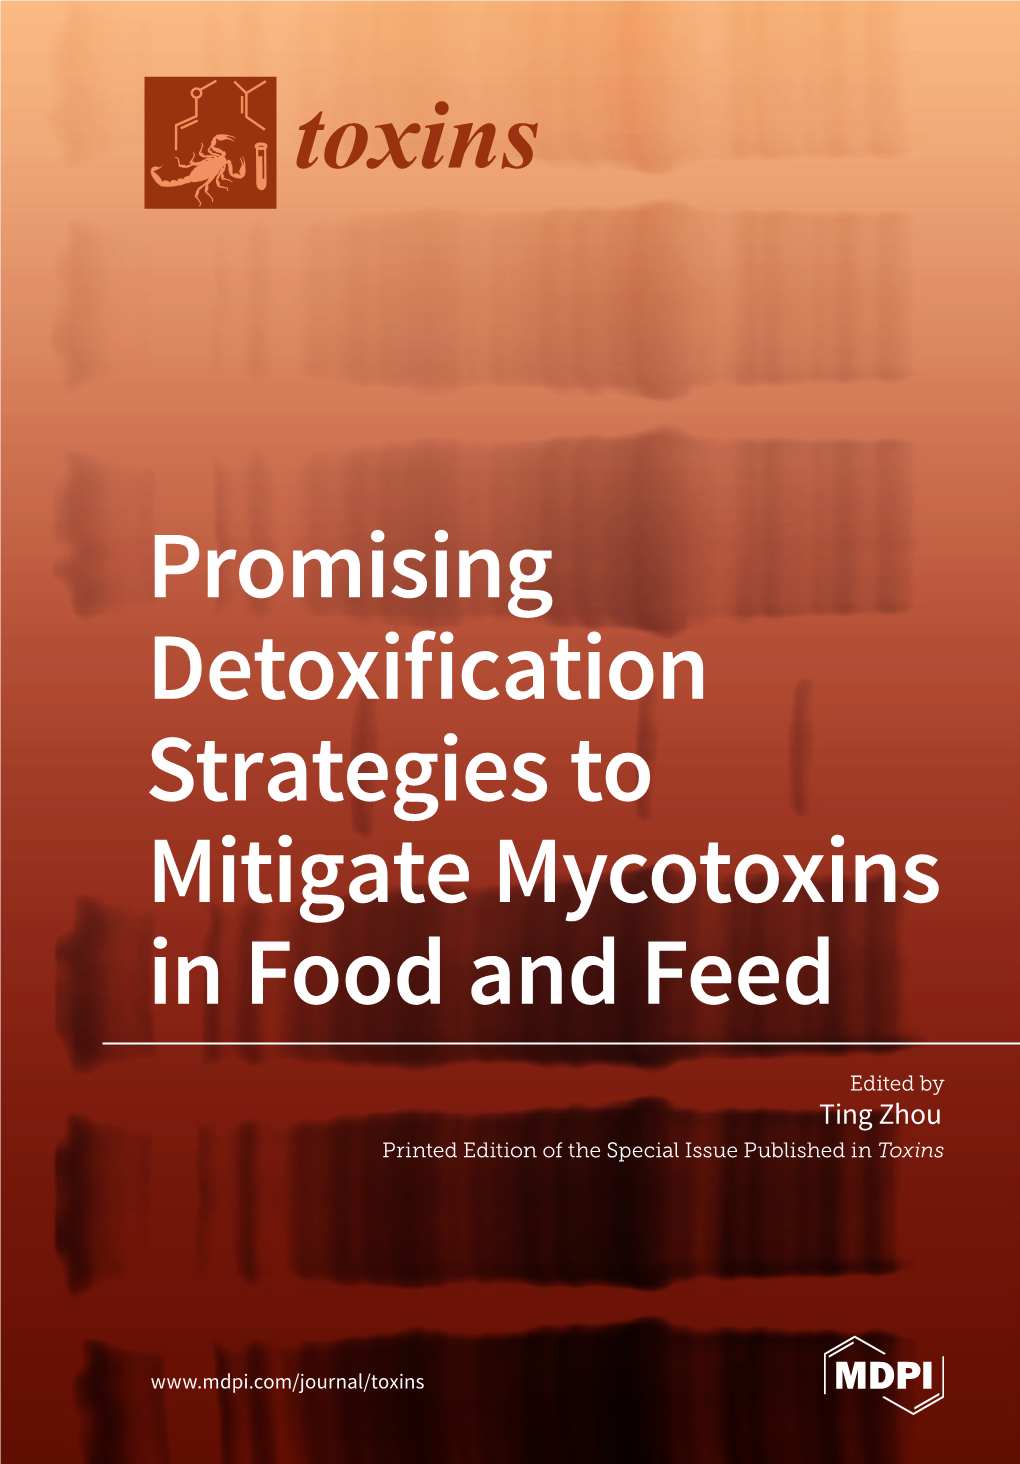 Promising Detoxification Strategies to Mitigate Mycotoxins in Food and Feed